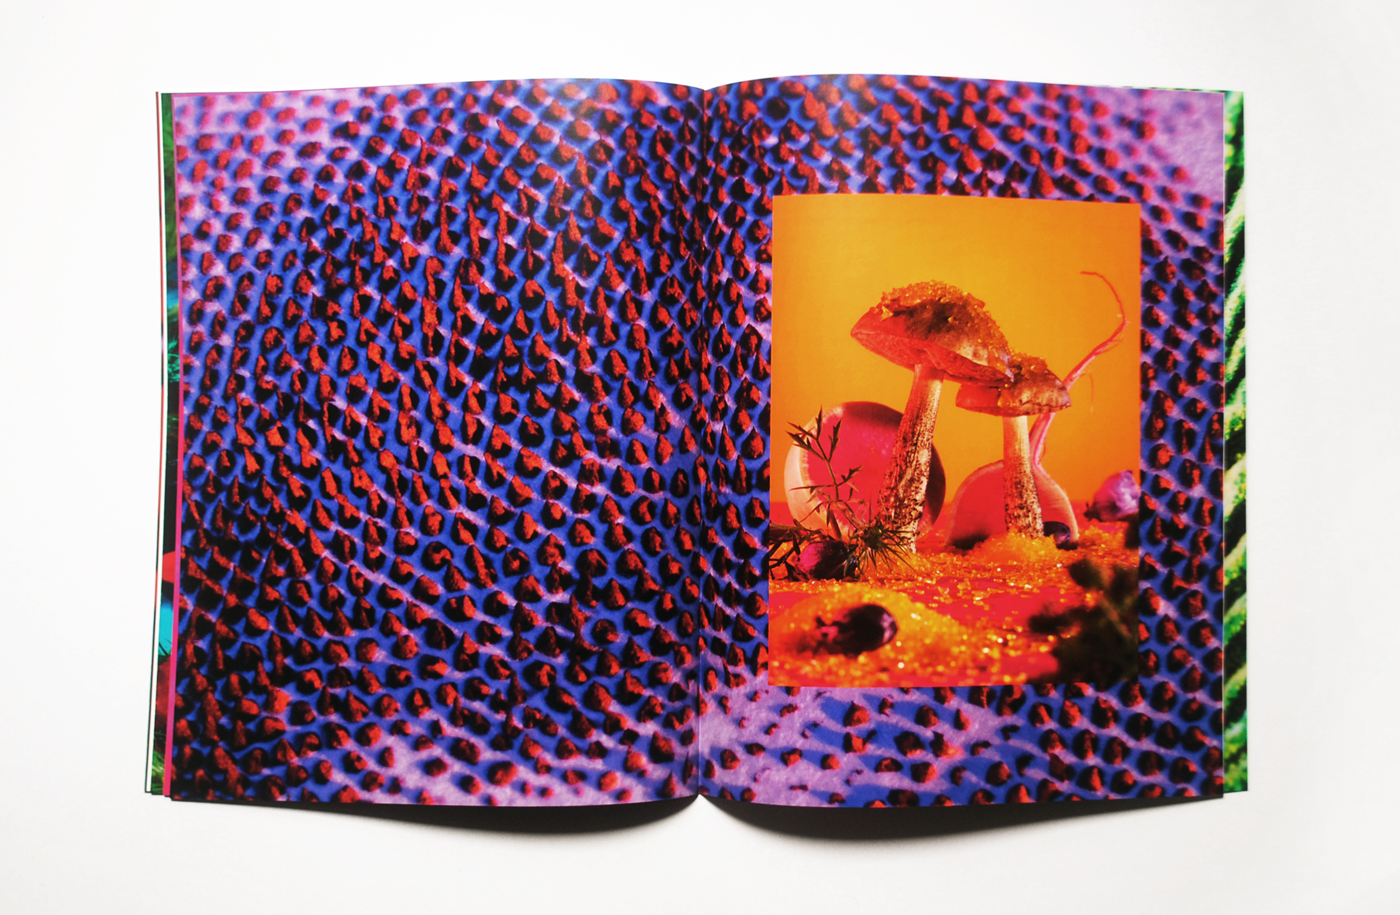 Purple and indigo spores across a spread with a photo of Leccinum scabrum in an orange world placed on top